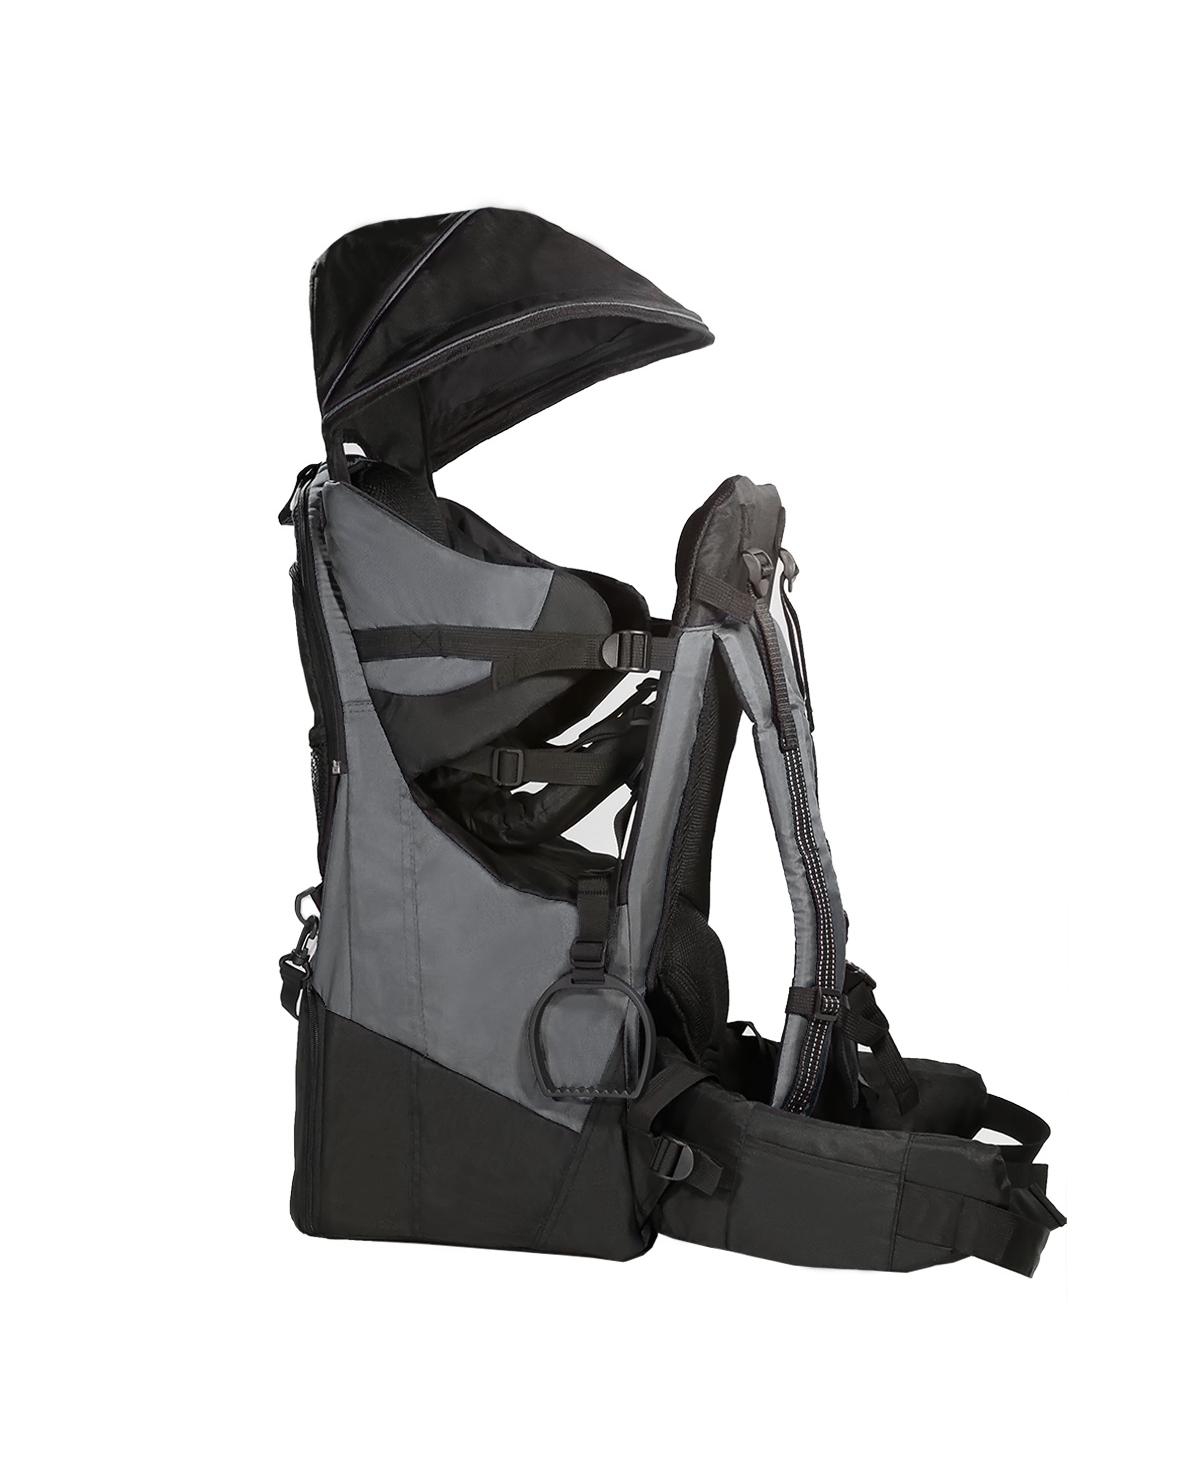 Clevrplus Deluxe Outdoor Child Backpack Baby Carrier Light Outdoor Hiking, Grey